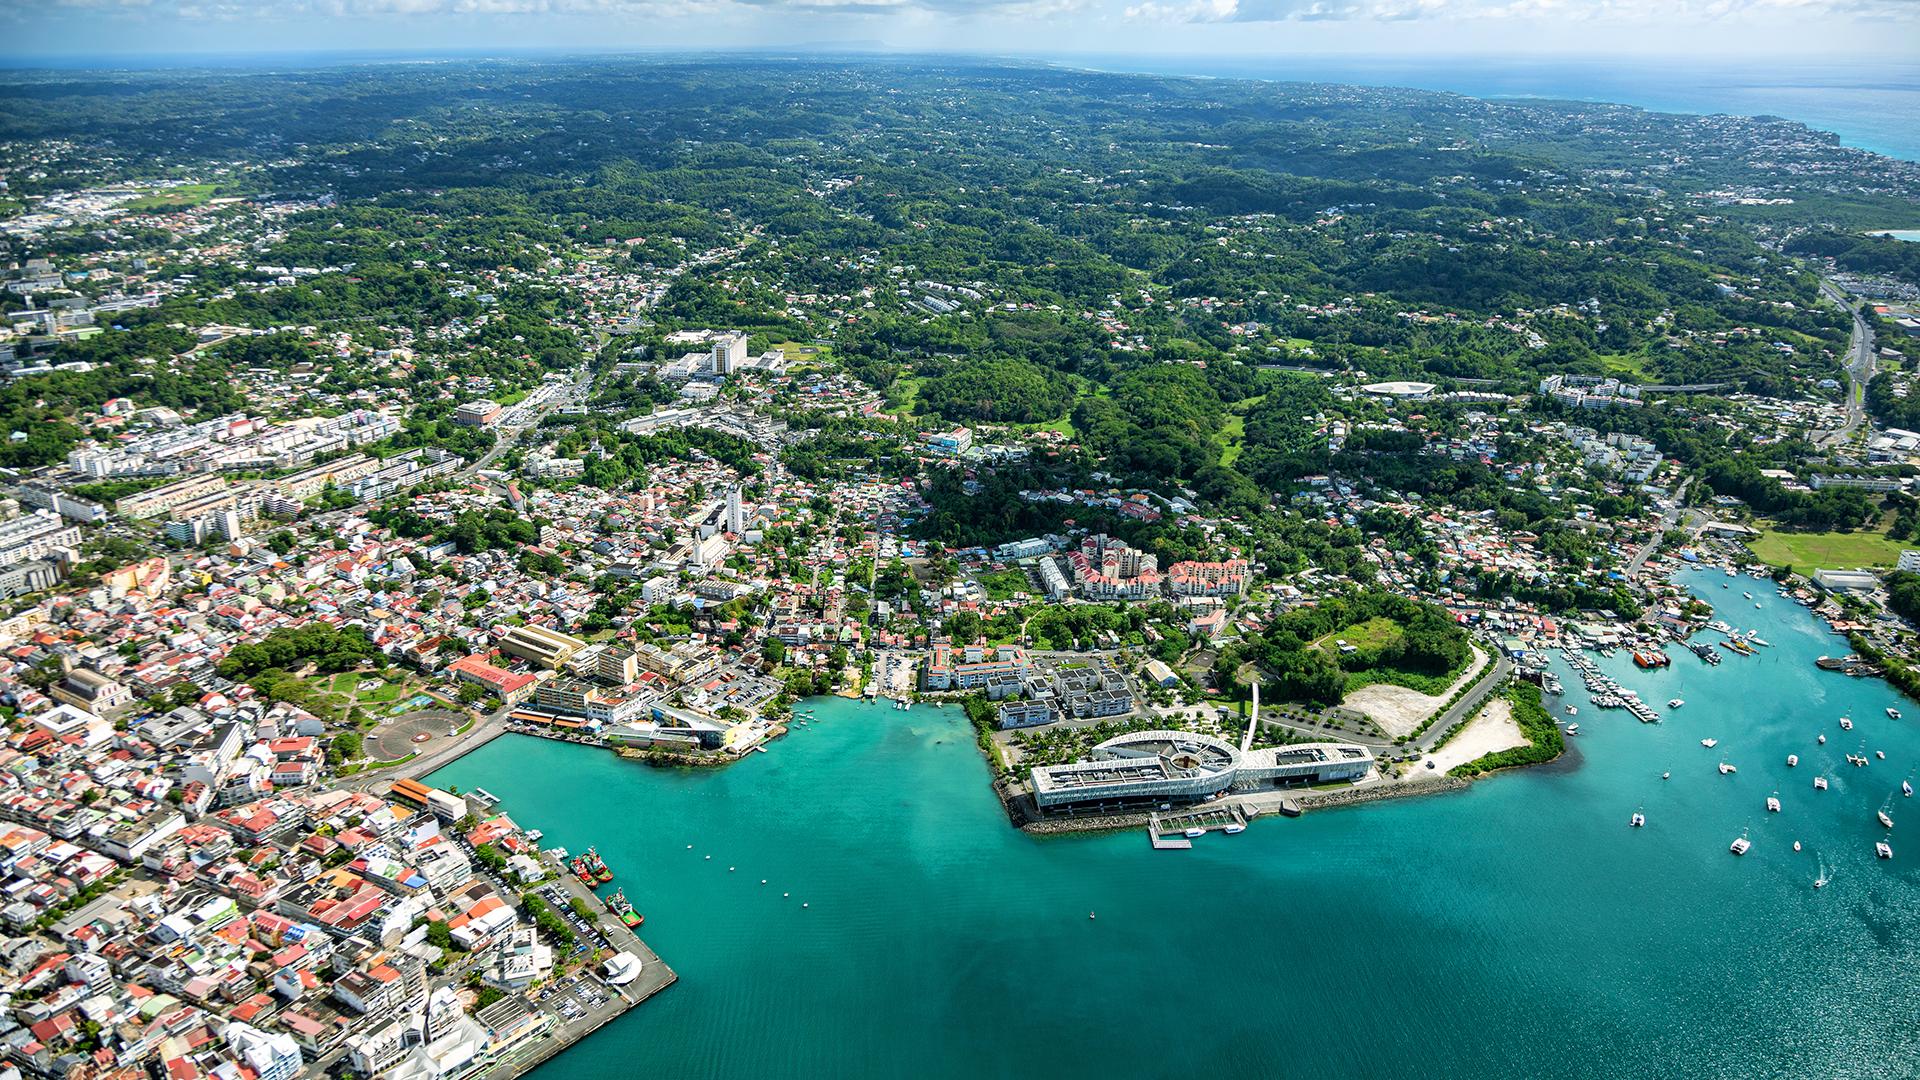 Aerial view of Pointe-a-Pitre in Guadeloupe, France